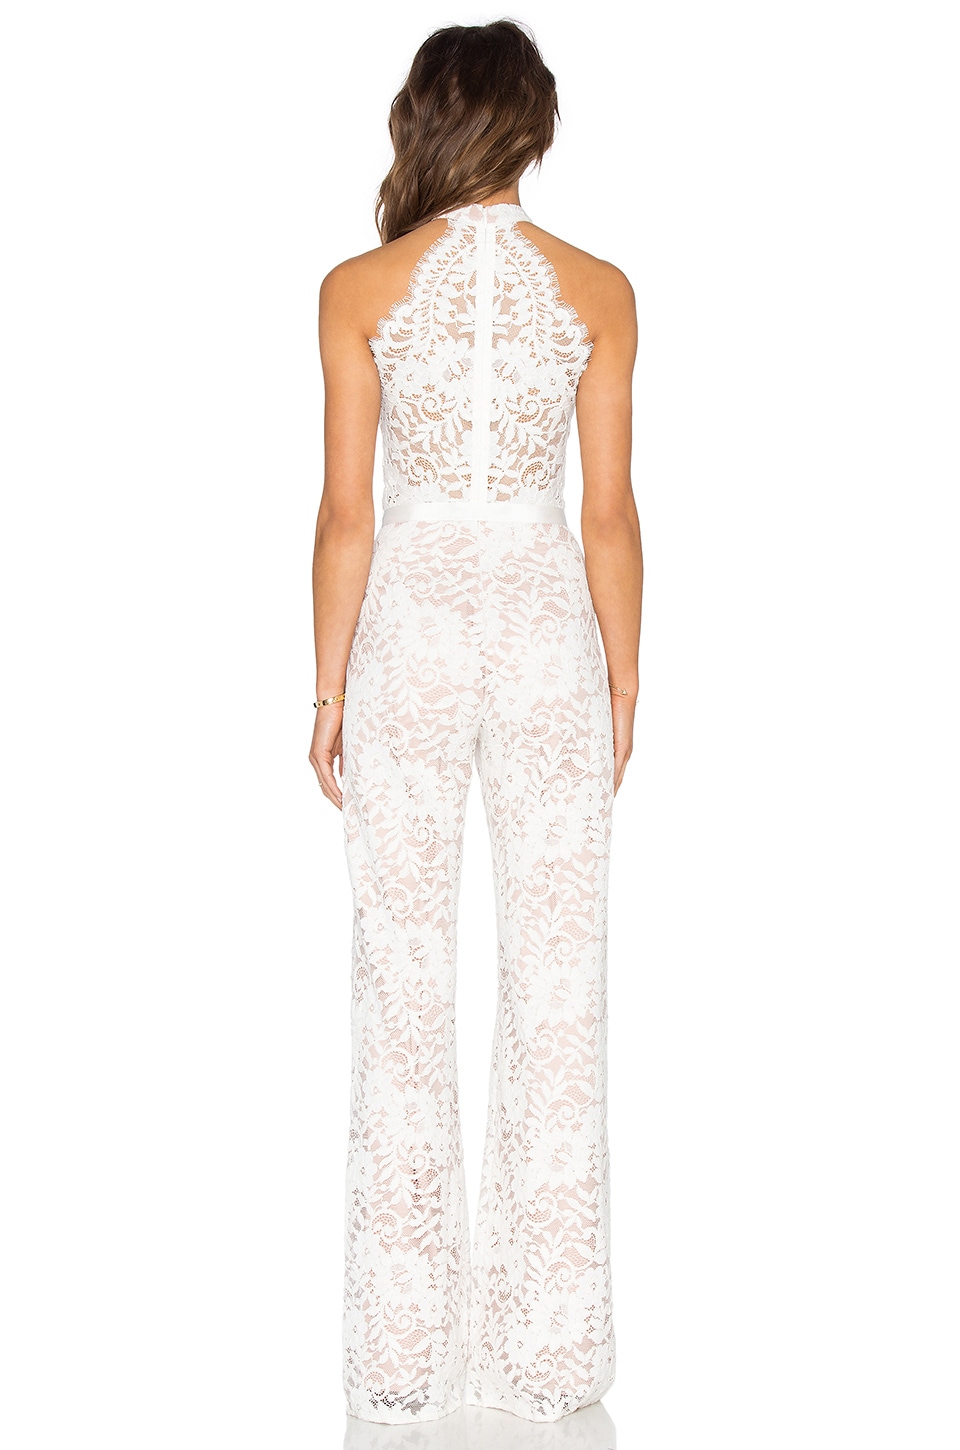 Alexis Rene Jumpsuit in White Lace | REVOLVE